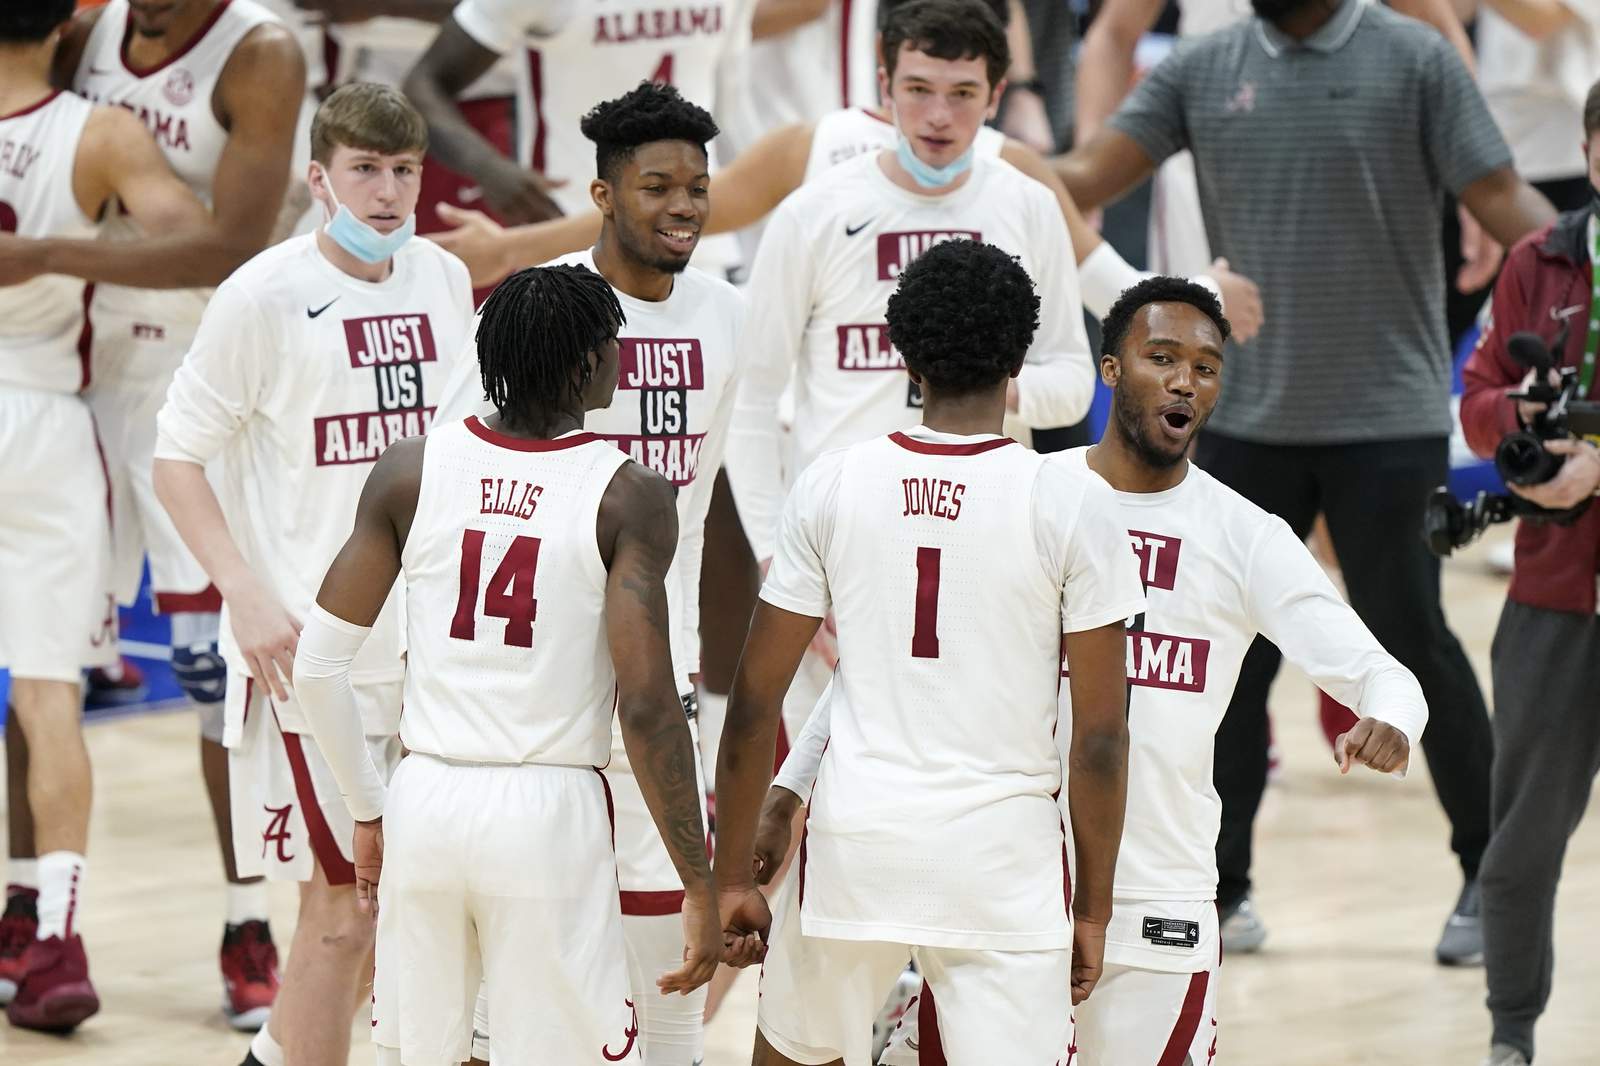 Down 15, No. 6 Alabama rallies past Tennessee in SEC semis